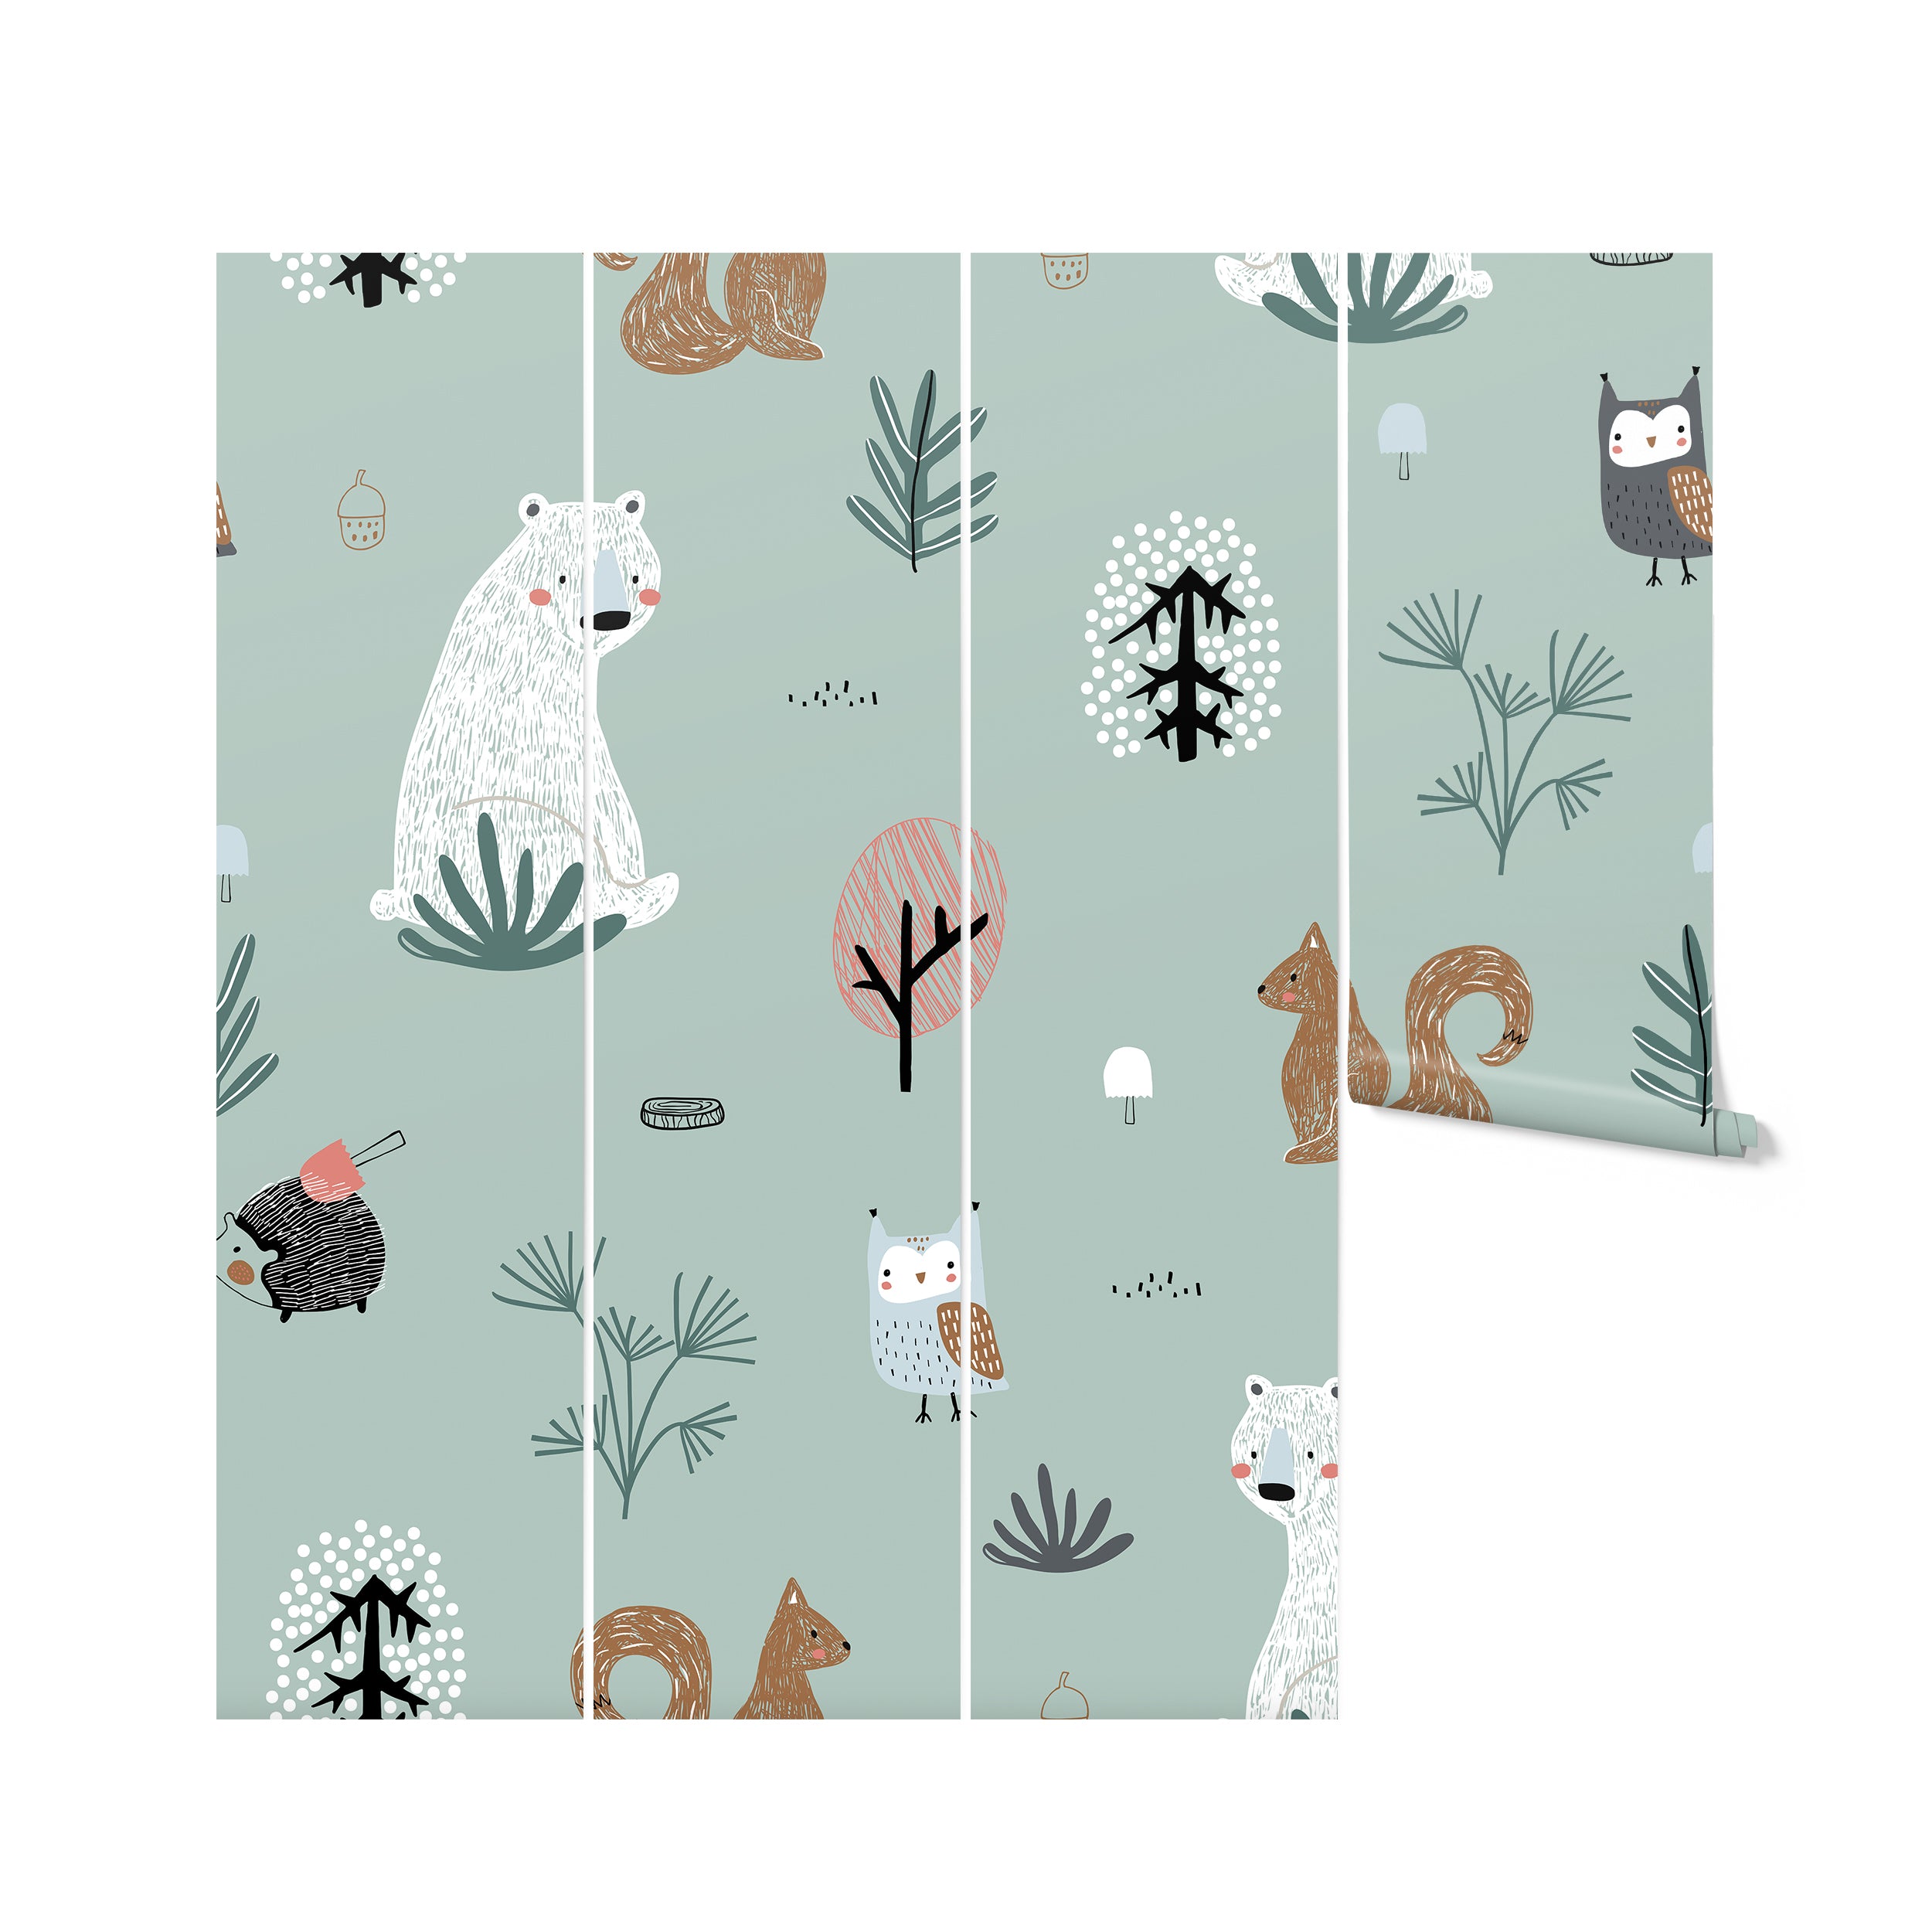 A roll of 'Forest Critters Kids Wallpaper' unfurling to reveal a heartwarming pattern of forest animals in muted colors, perfect for creating a nurturing and imaginative environment for children.